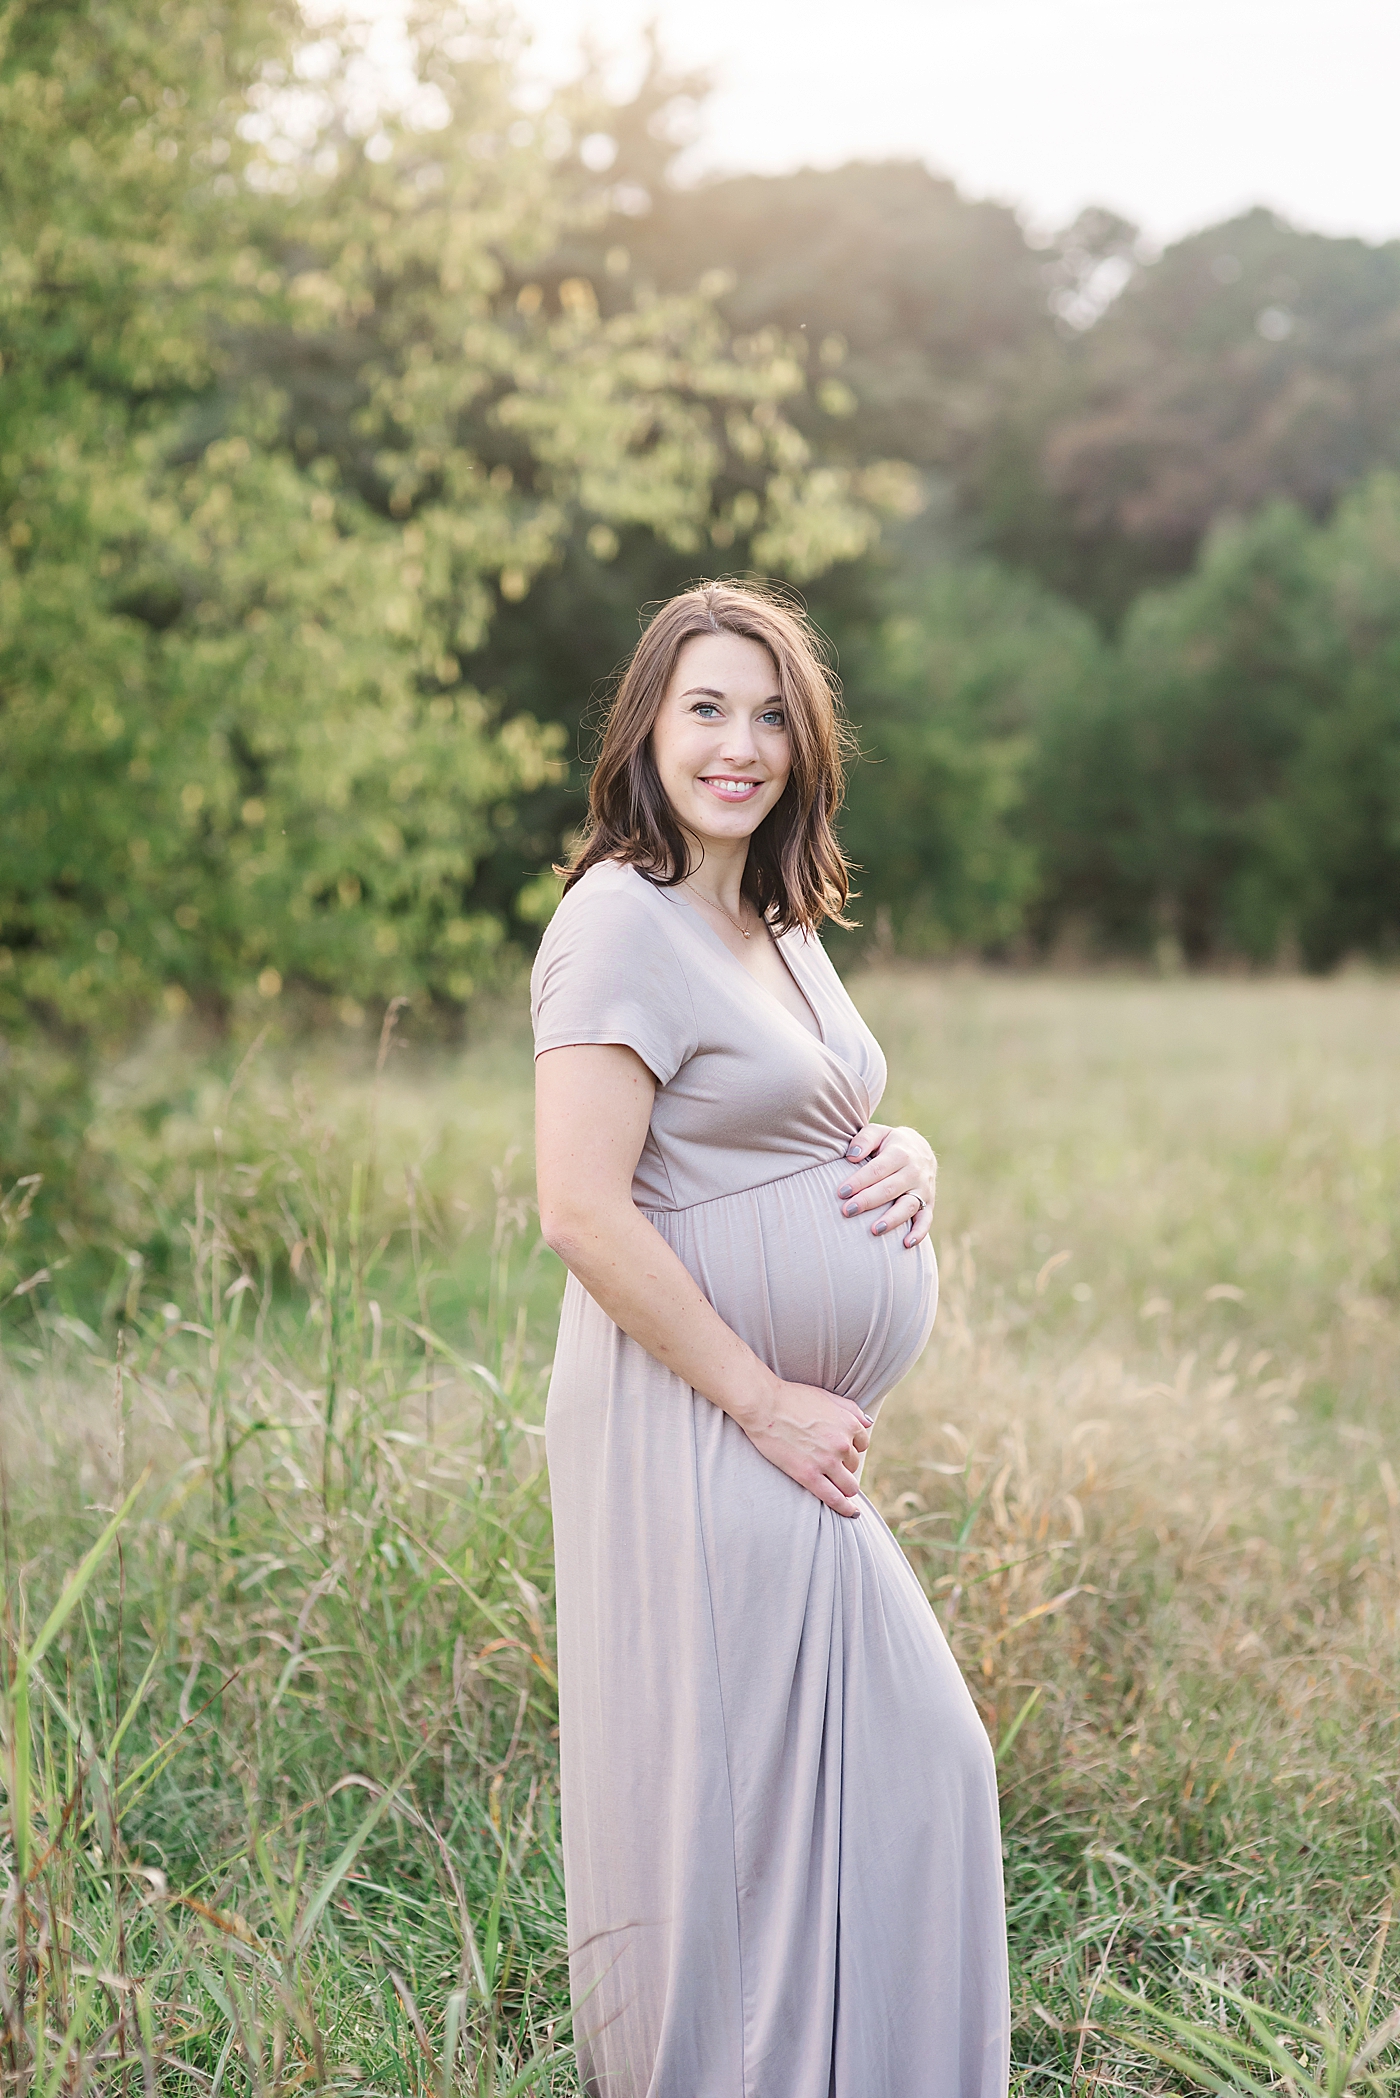 Expectant mom in mauve dress smiling | Photo by Anna Wisjo